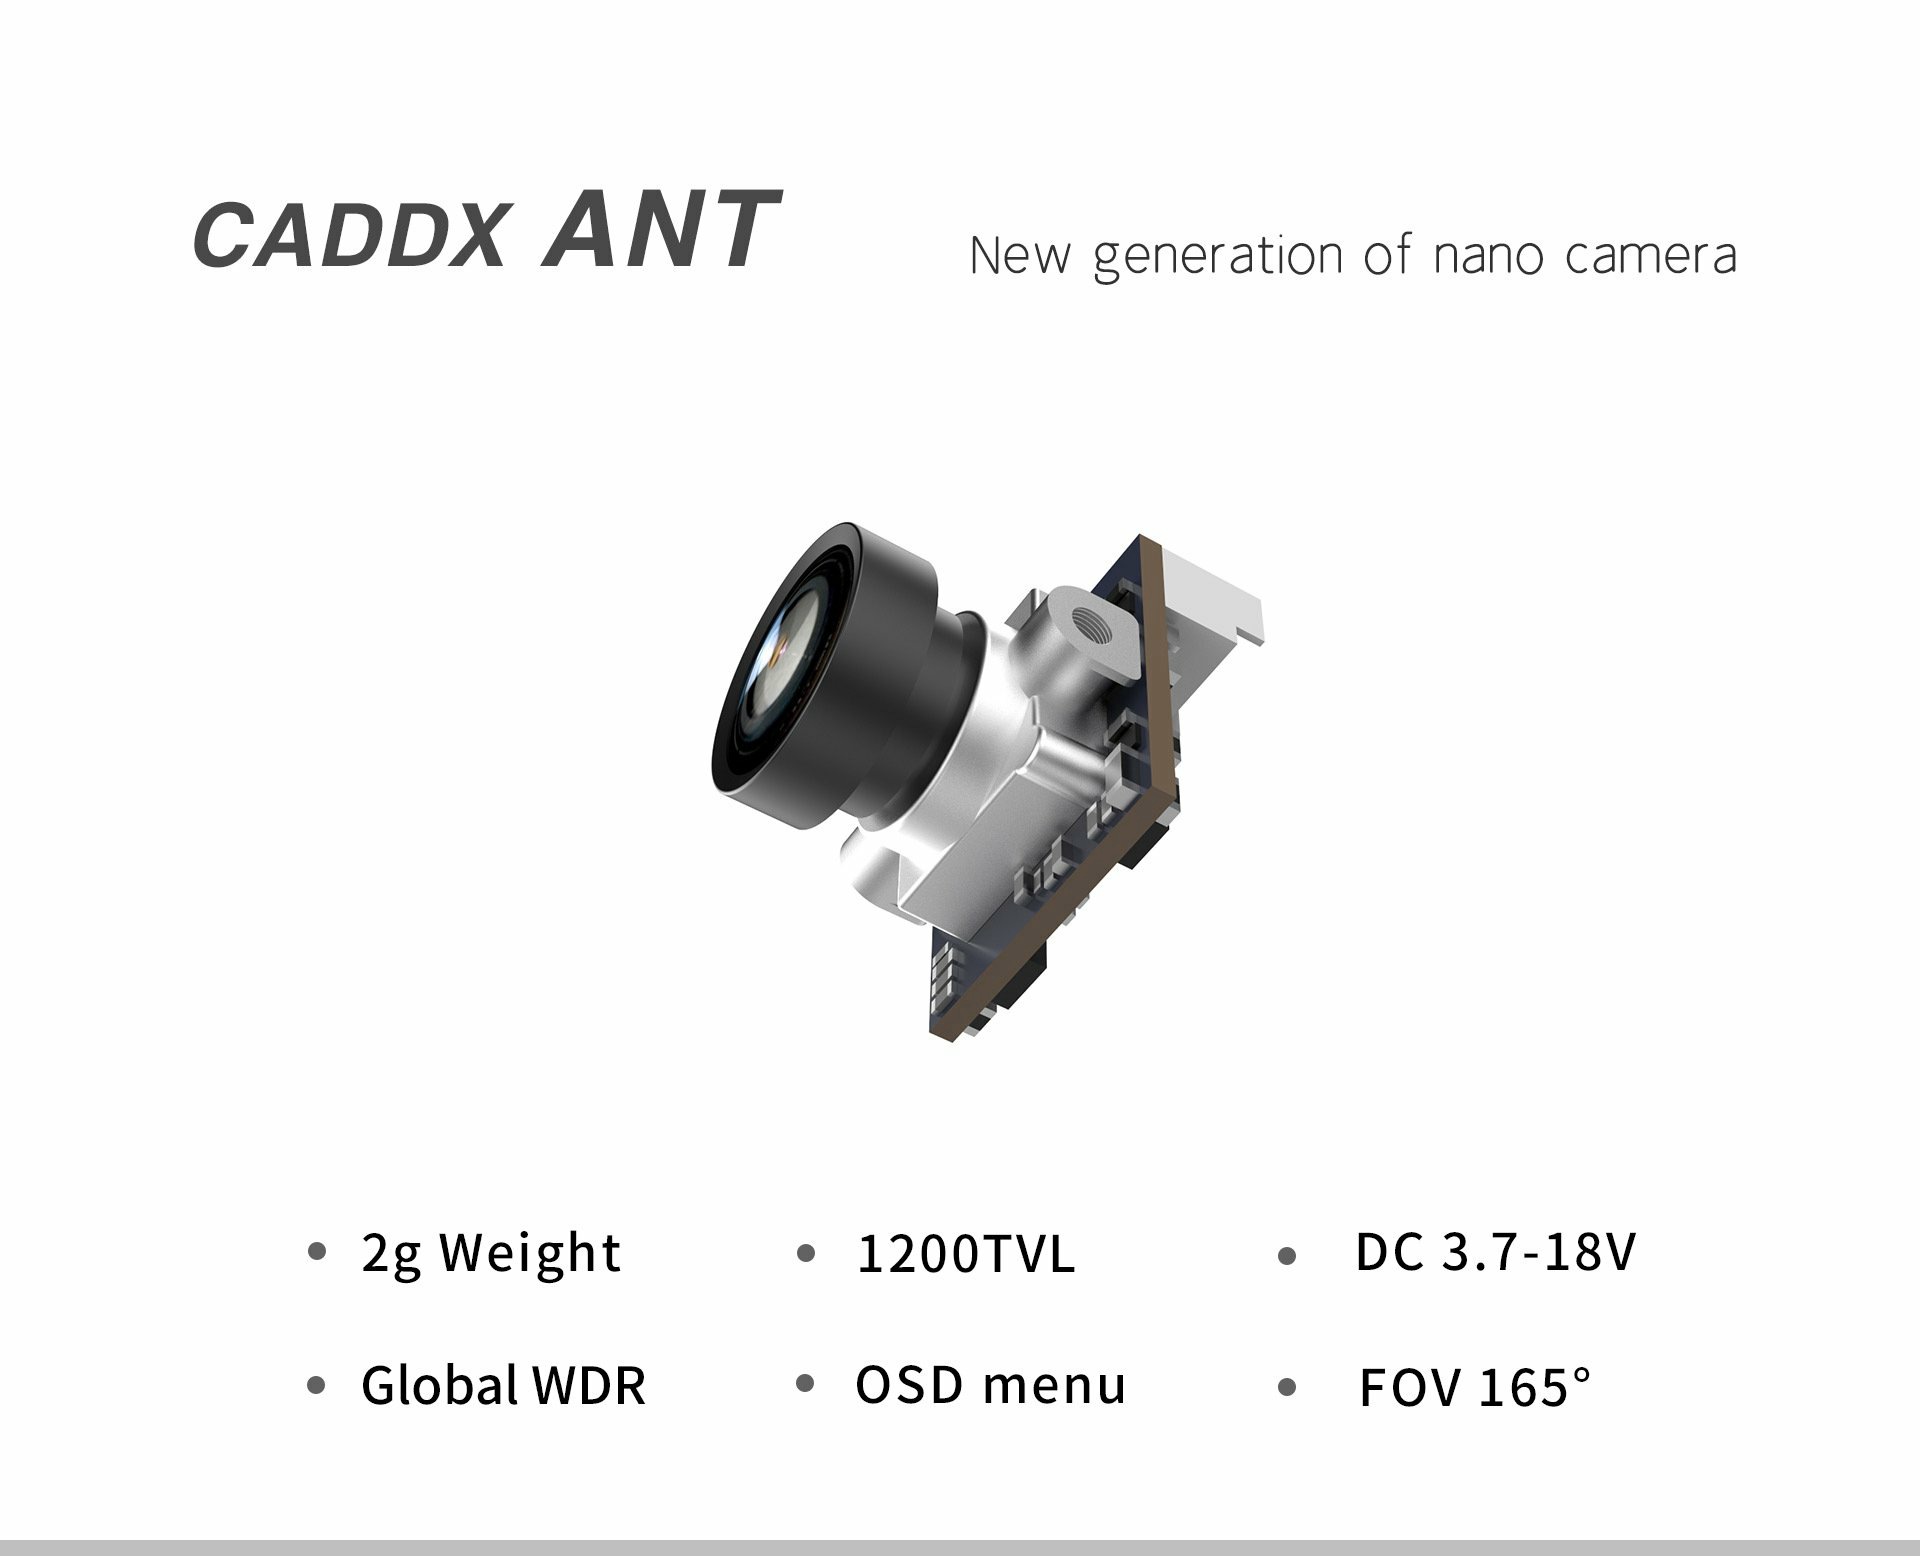 Caddx Ant Silver-16:9